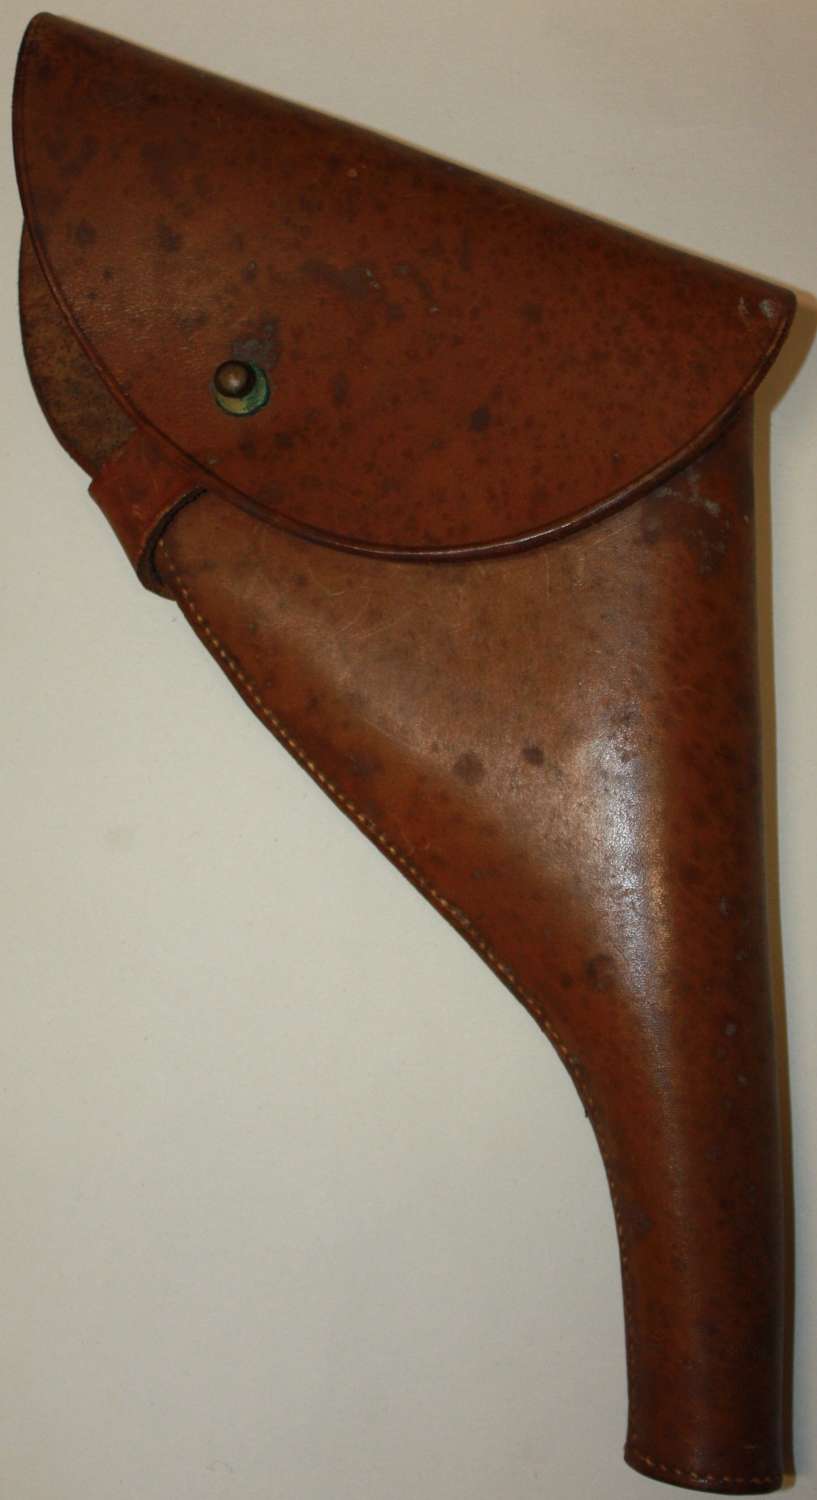 A SAM BROWN PISTOL HOLSTER WHICH IS FOR A .38 PISTOL